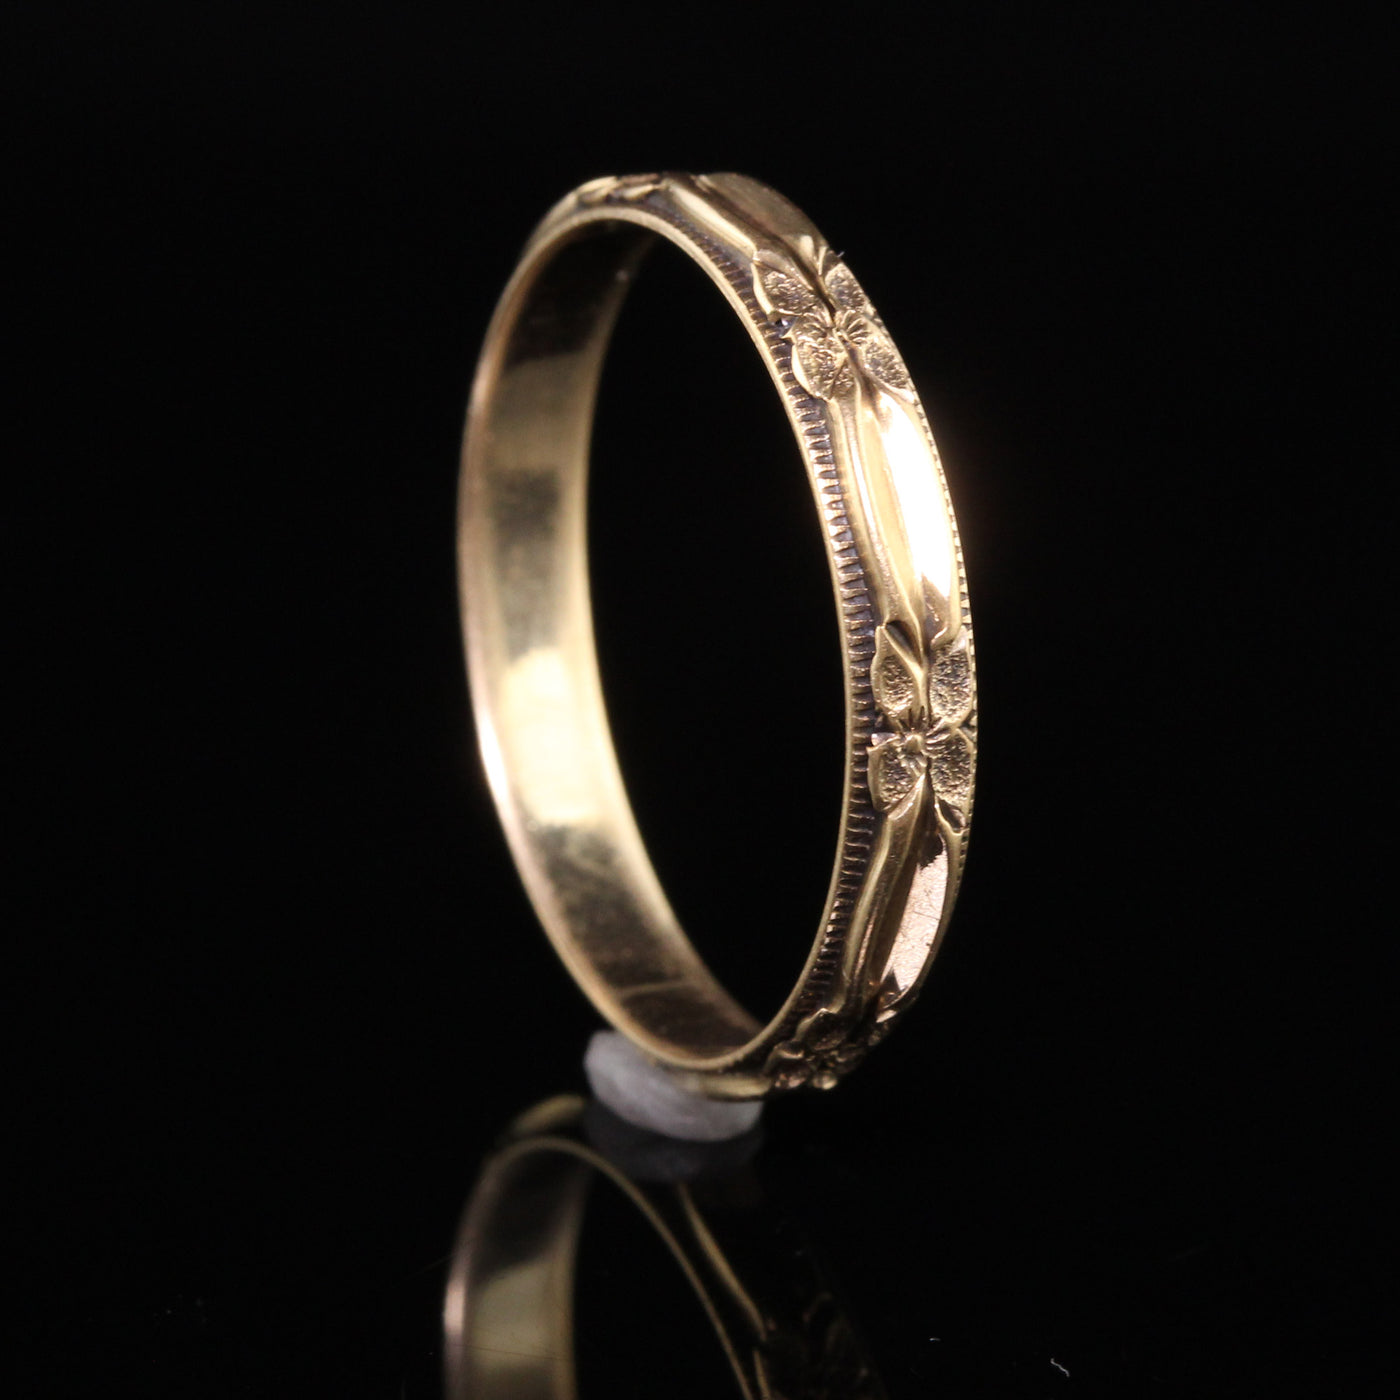 Antique Art Deco 14K Yellow Gold Engraved Wedding Band - Size 11